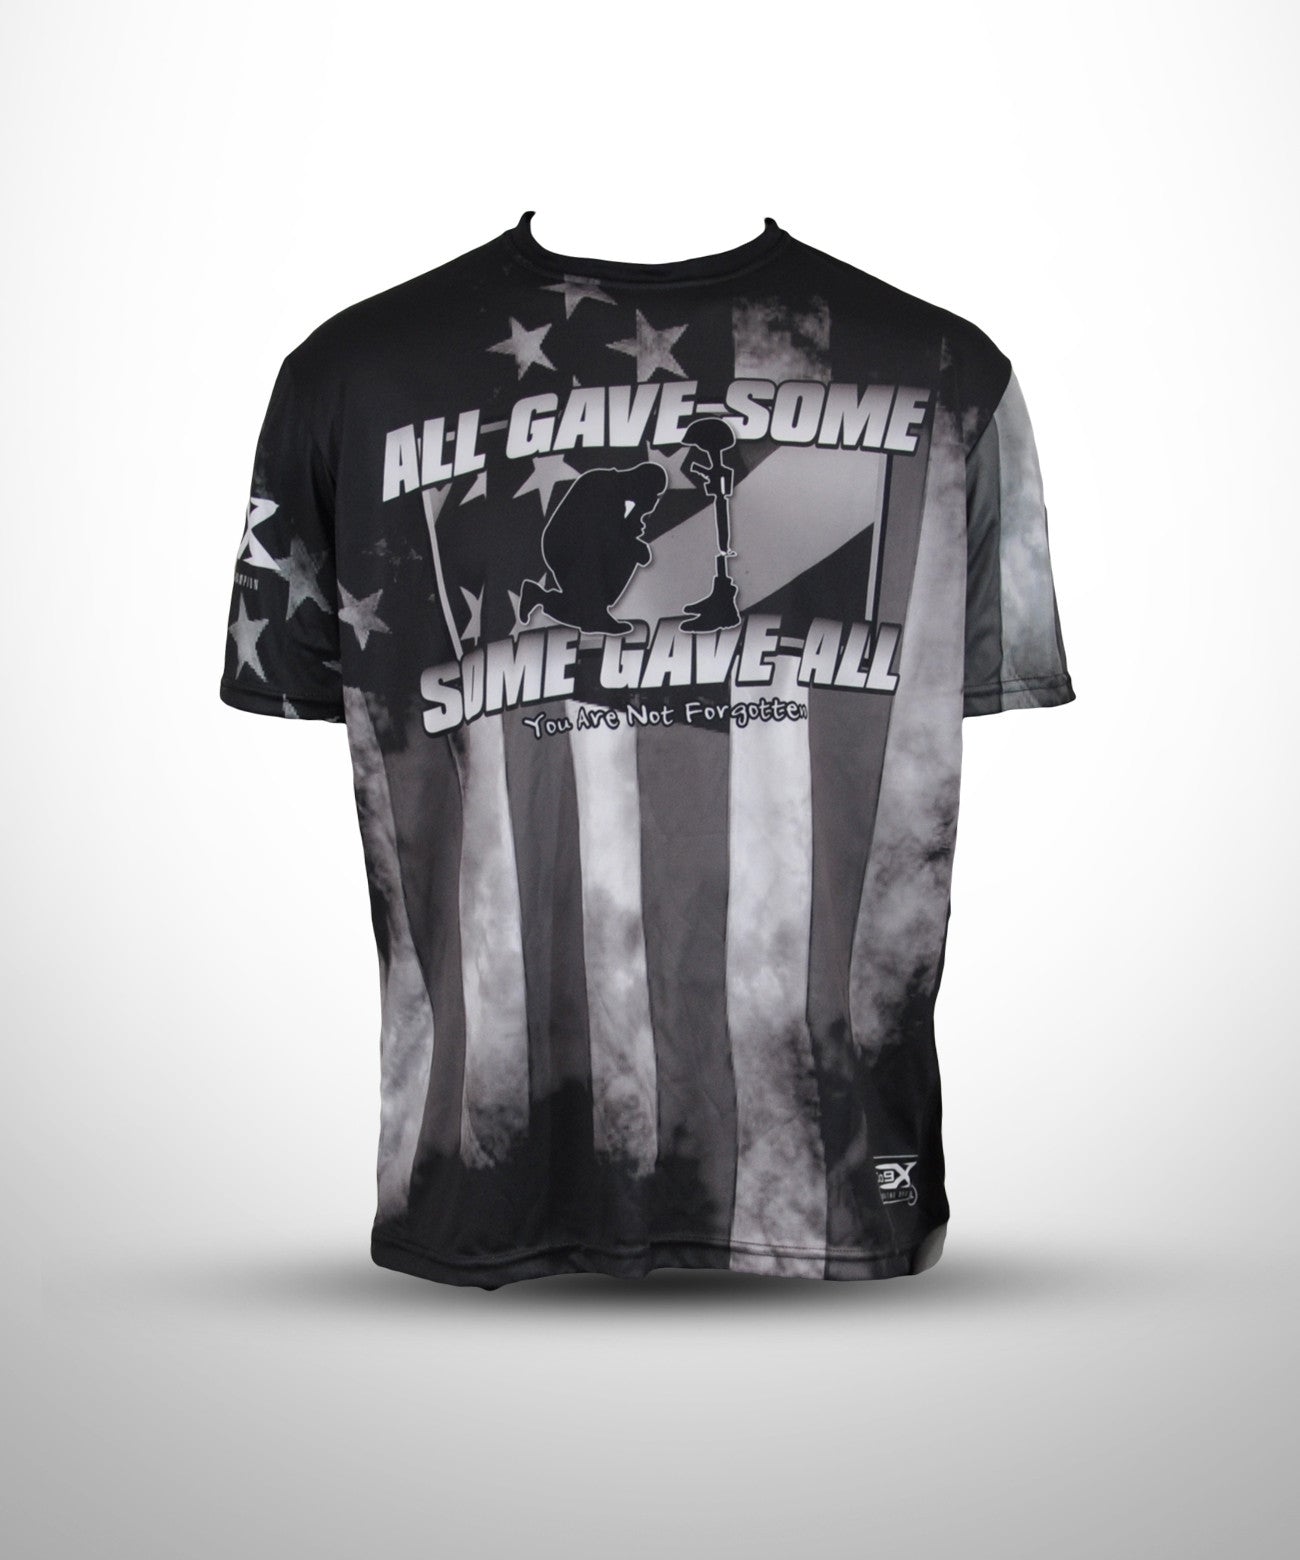 Full dye sublimated jersey - Evo9x Store